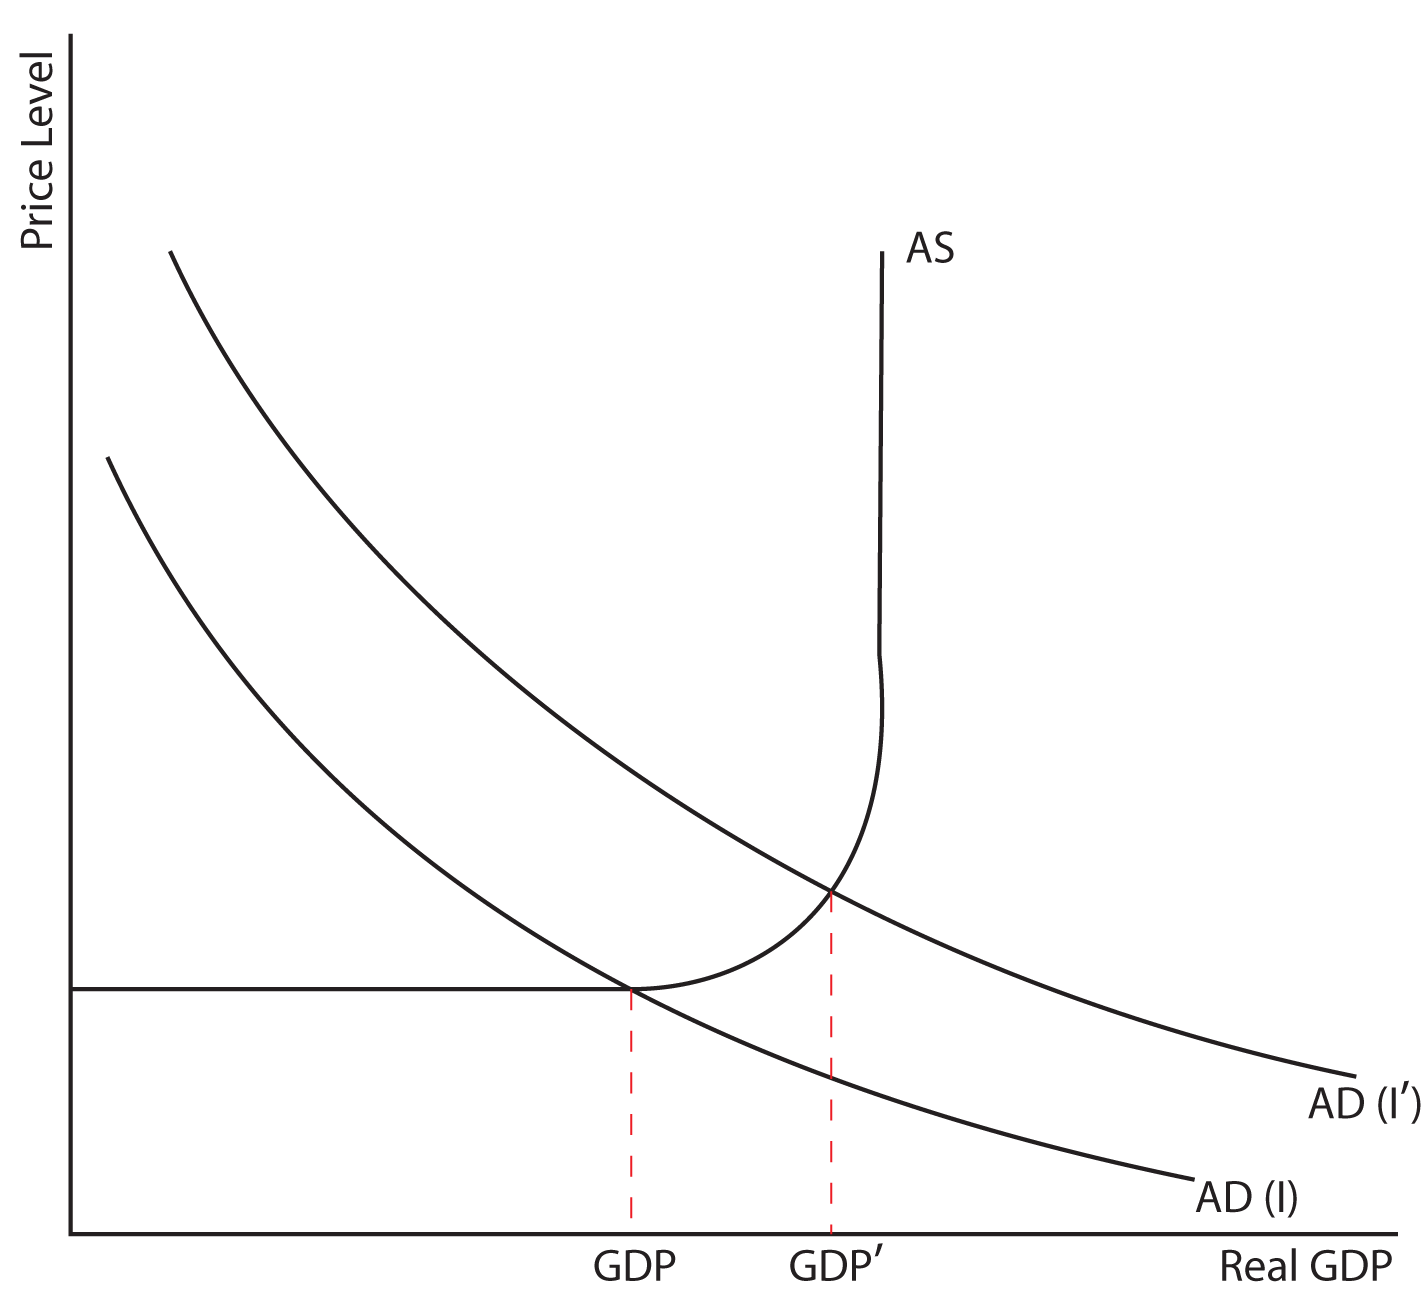 10.06
This graph shows real GDP on the X axis and Price Level on the Y axis. A curved line labeled AD (I) slopes downward from the Y axis and is concave away from the origin. A second curved line labeled AD (I Prime) is identical to but slightly above the first.   Another line begins on the Y axis and continues horizontally until it crosses line AD (I).  It then begins to curve upward forming a quarter circle until it reaches a vertical angle, at which point it continues upward vertically to the edge of the graph.  This line is labeled A S.  The point at which line A S intersects line AD (I) is connected by dotted red vertical line to the X axis.  The point where the dotted line meets the X axis is labeled GDP.  The point at which line A S intersects line AD (I Prime) is connected by dotted red vertical line to the X axis.  The point where the dotted line meets the X axis is labeled GDP Prime.  